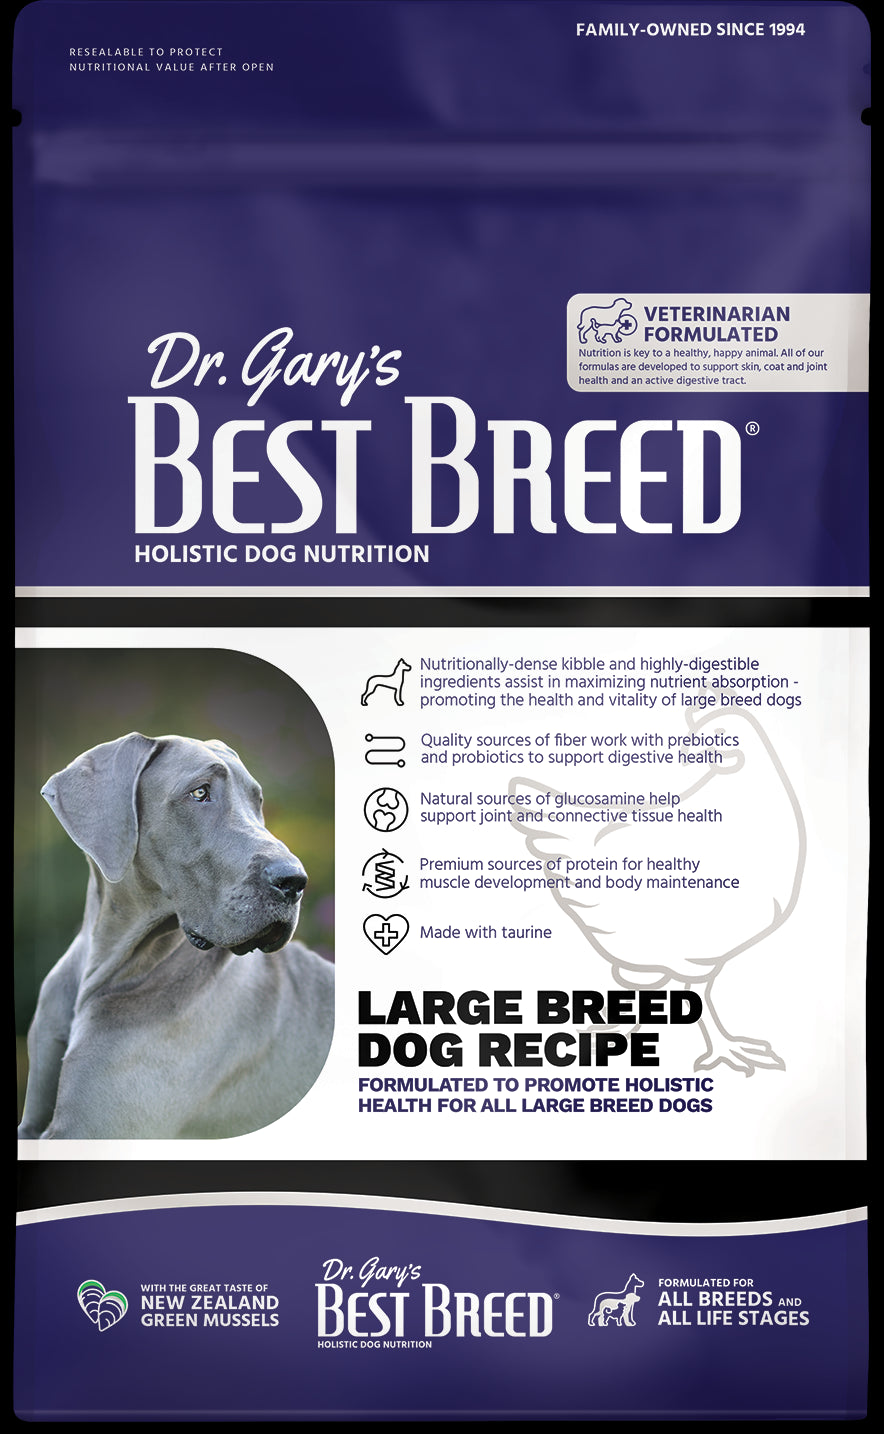 Dr. Gary's Large Breed Dog Recipe